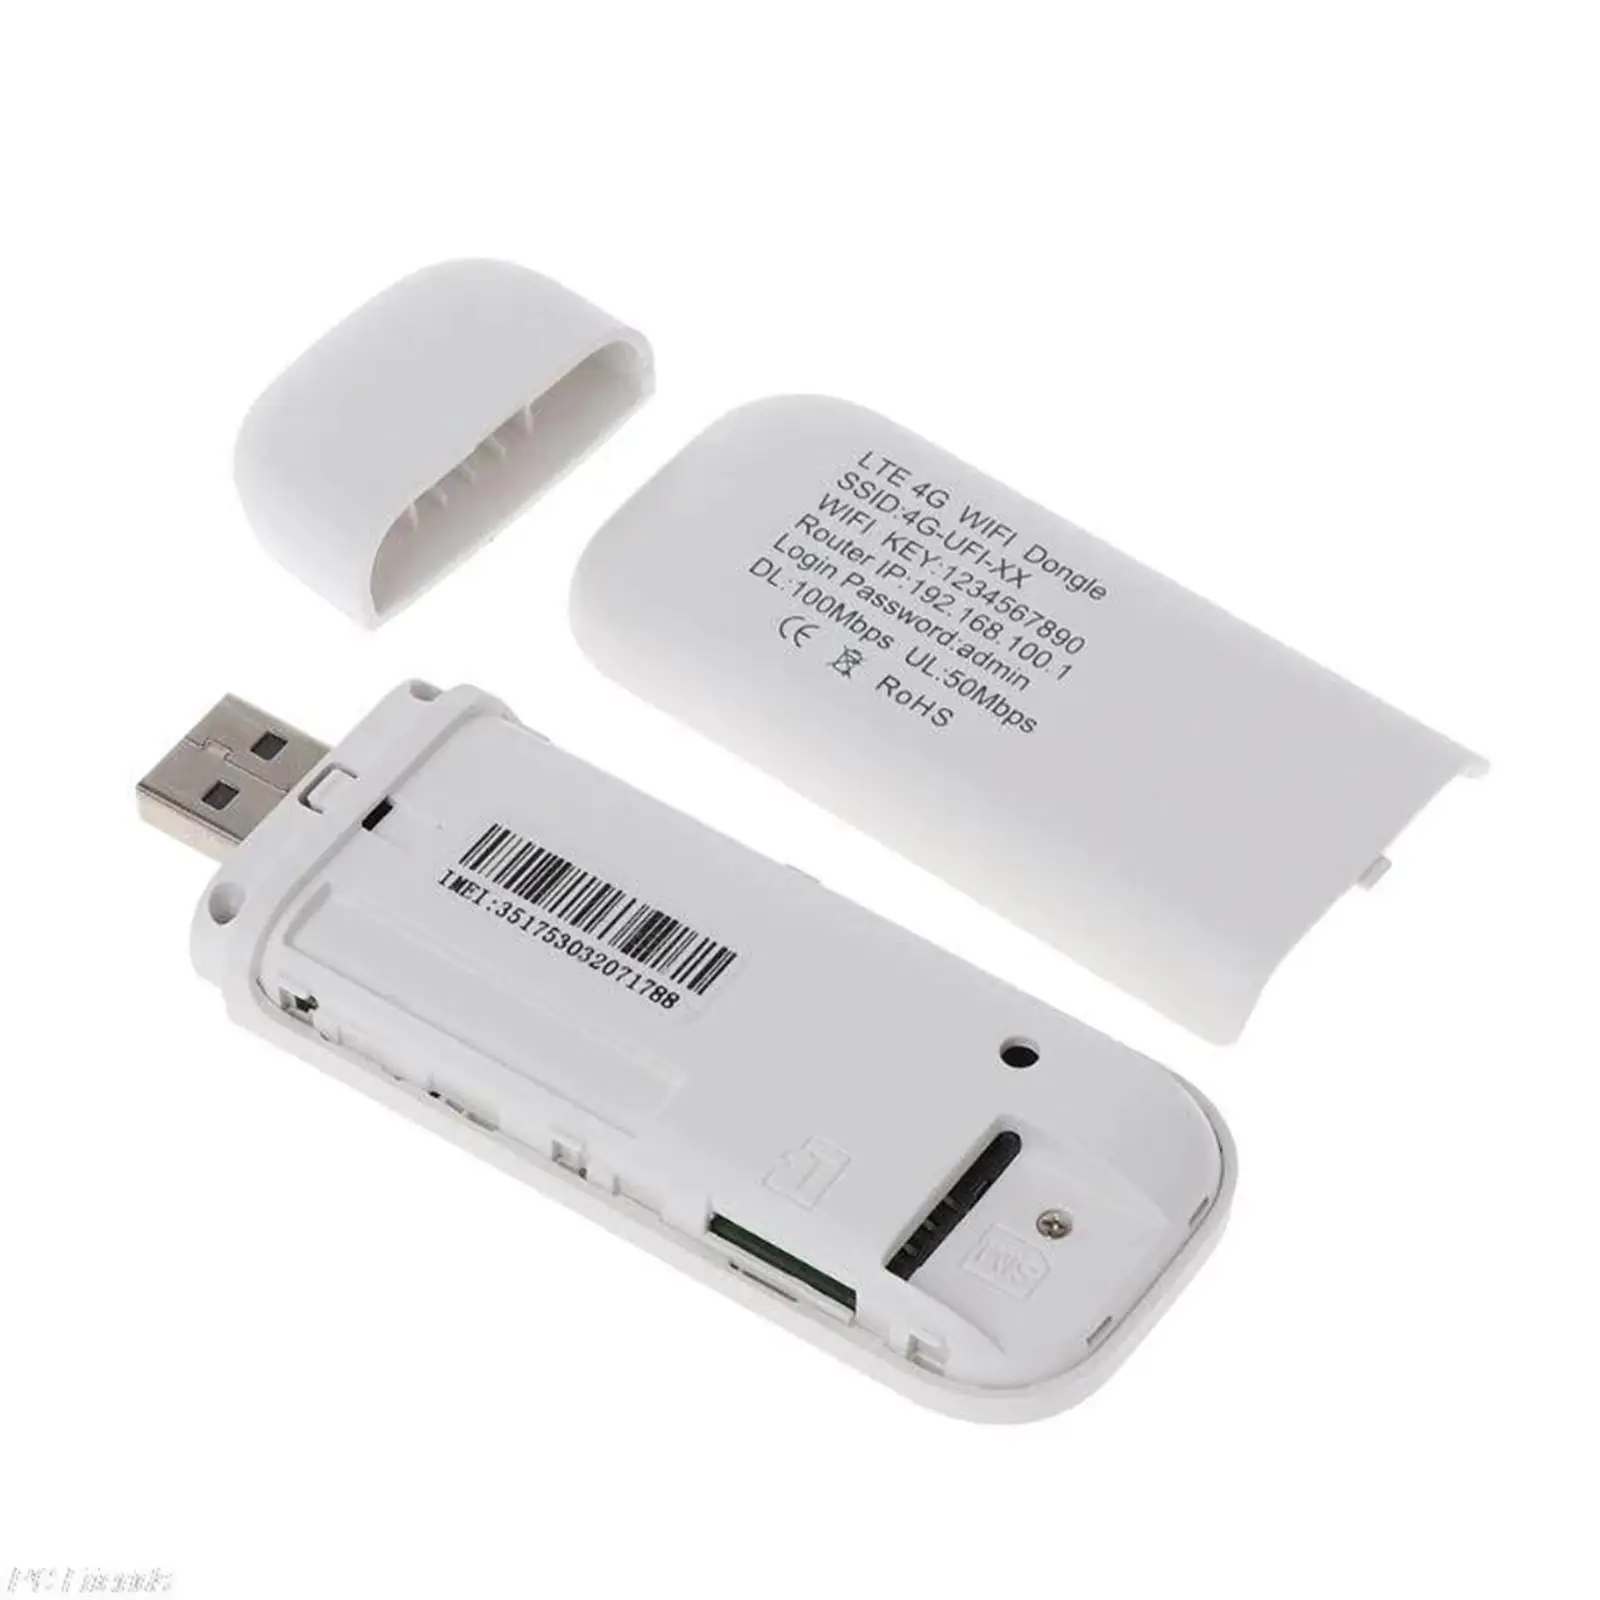 4G LTE USB Modem Network Adapter with WiFi Hotspot SIM Card 4G Wireless Router,Network Adapter,Network Card WiFi Router 